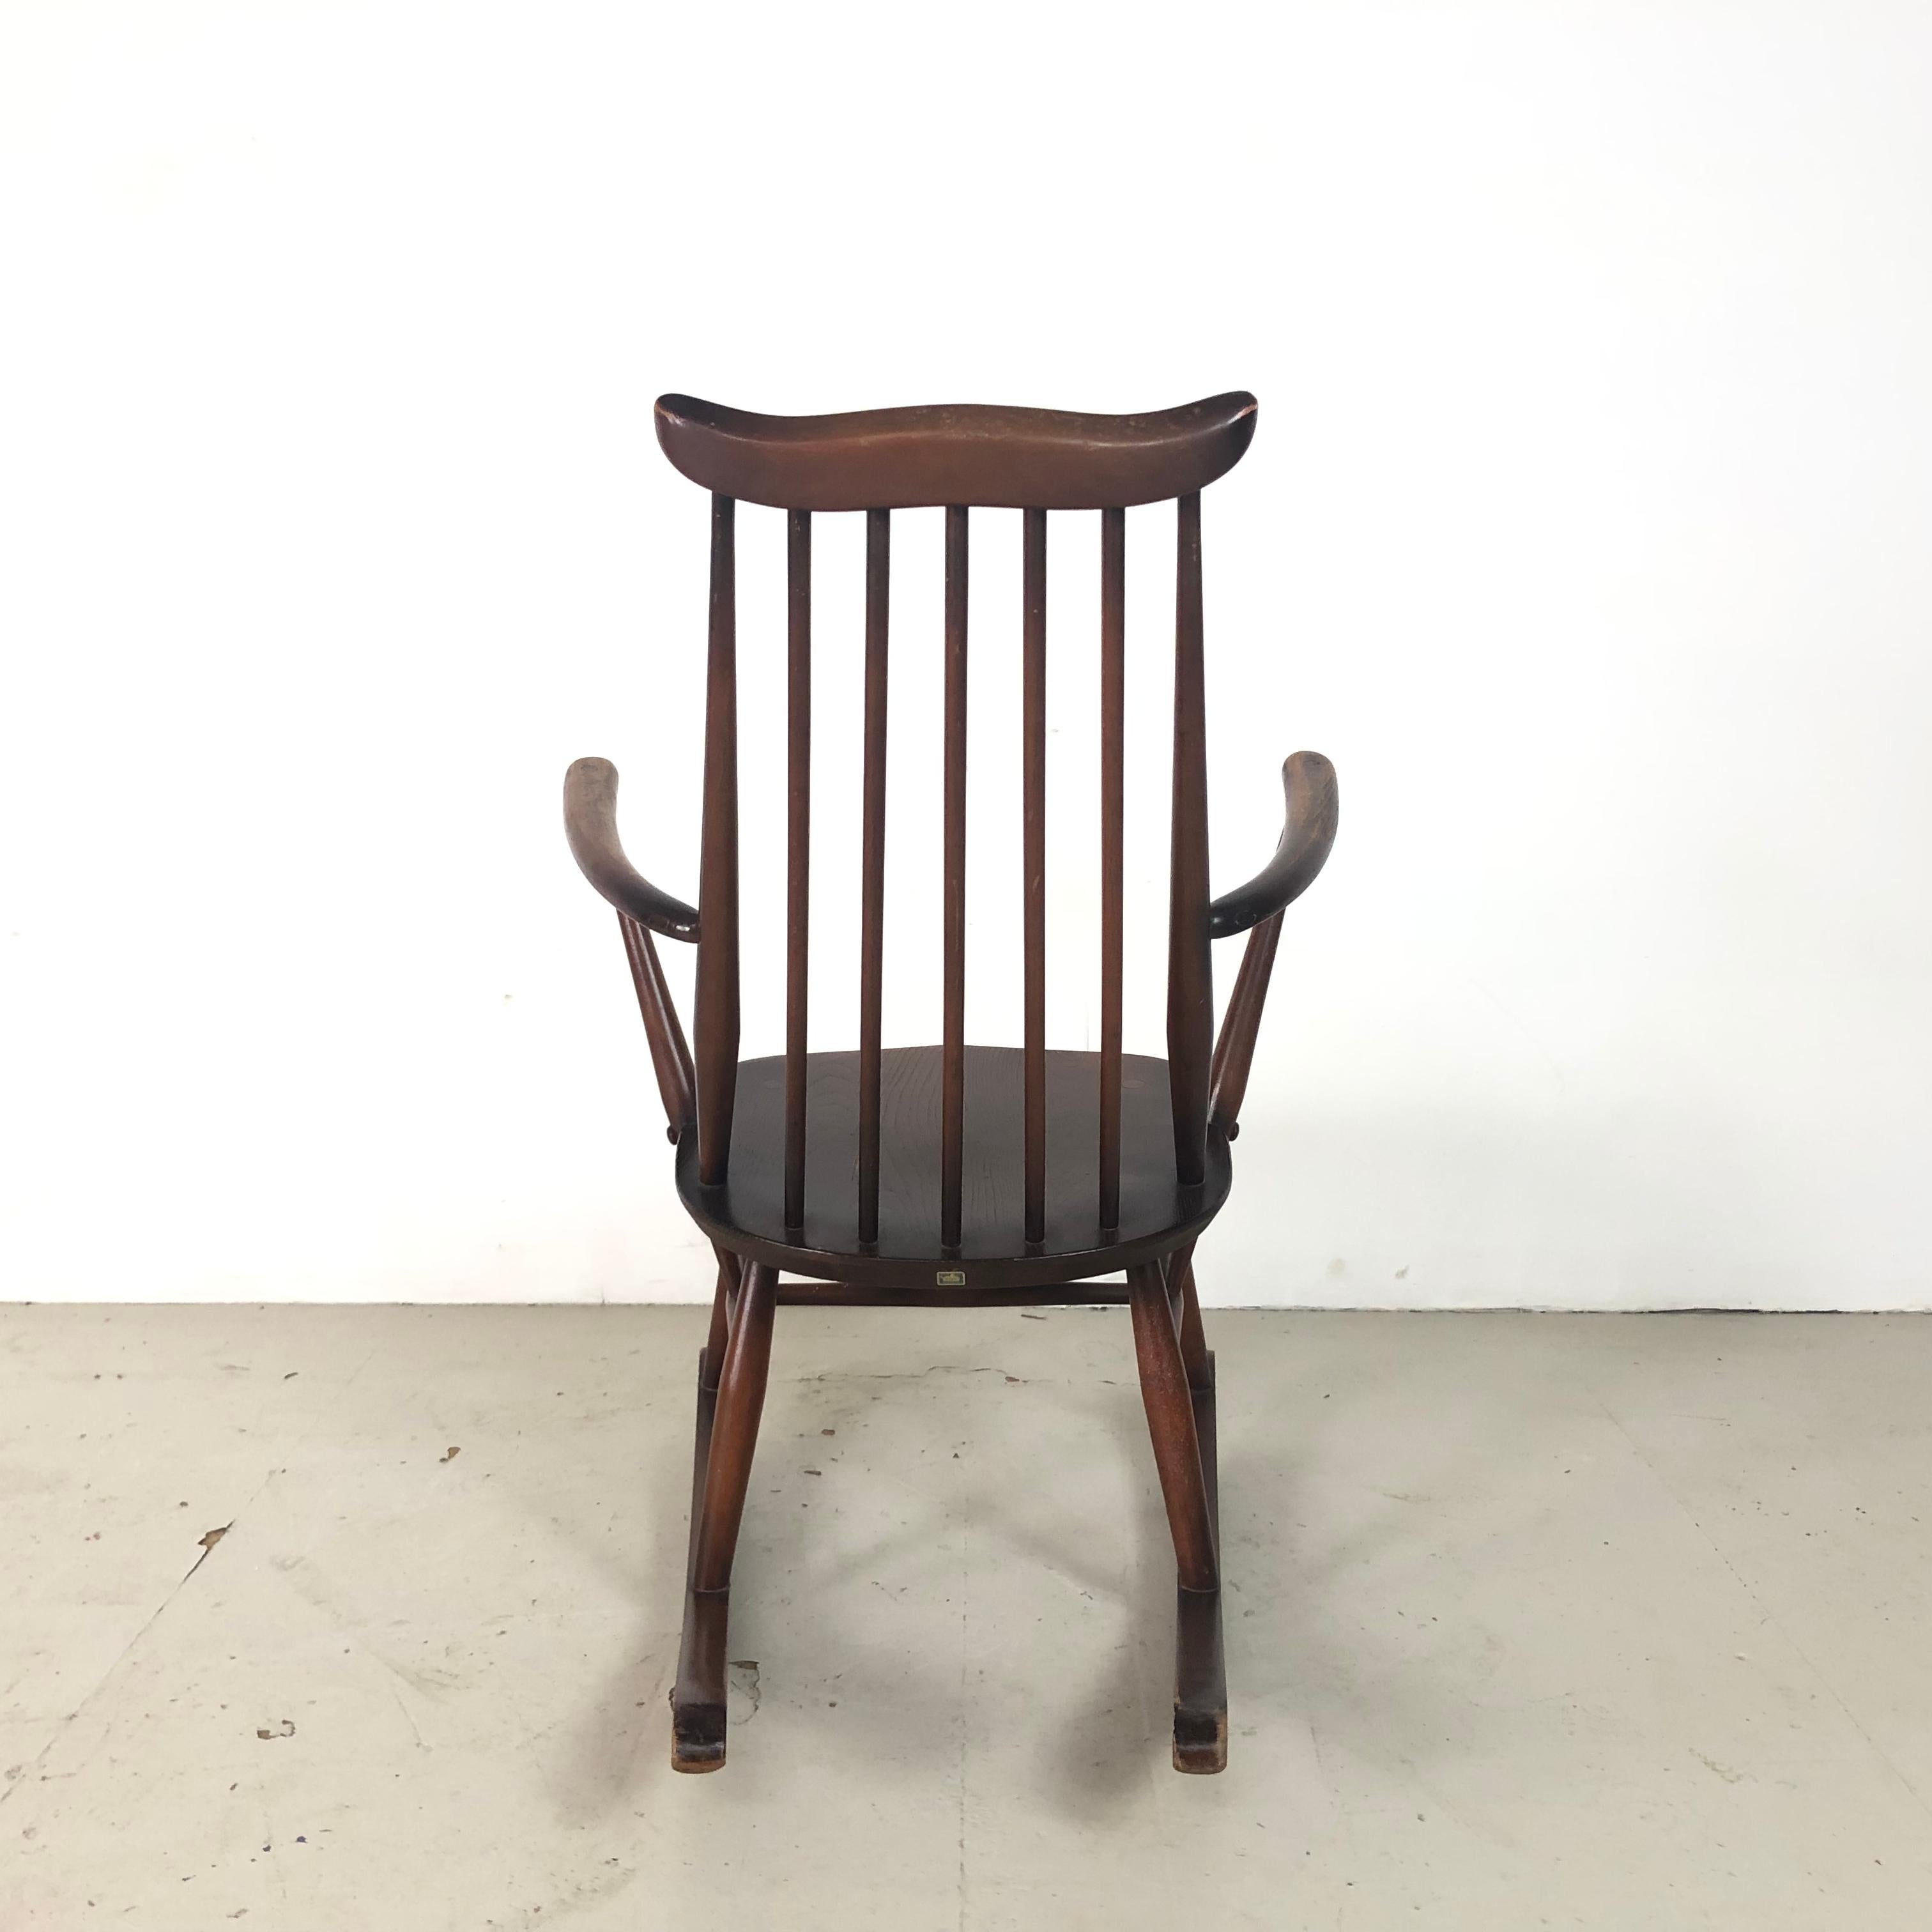 Lovely early Ercol rocking chair made of dark stained elm veneered ply with a bent elm frame. 

In good vintage condition. Some wear and tear as to be expected but nothing noticeable and nothing which detracts.

Approximate dimensions:

Height